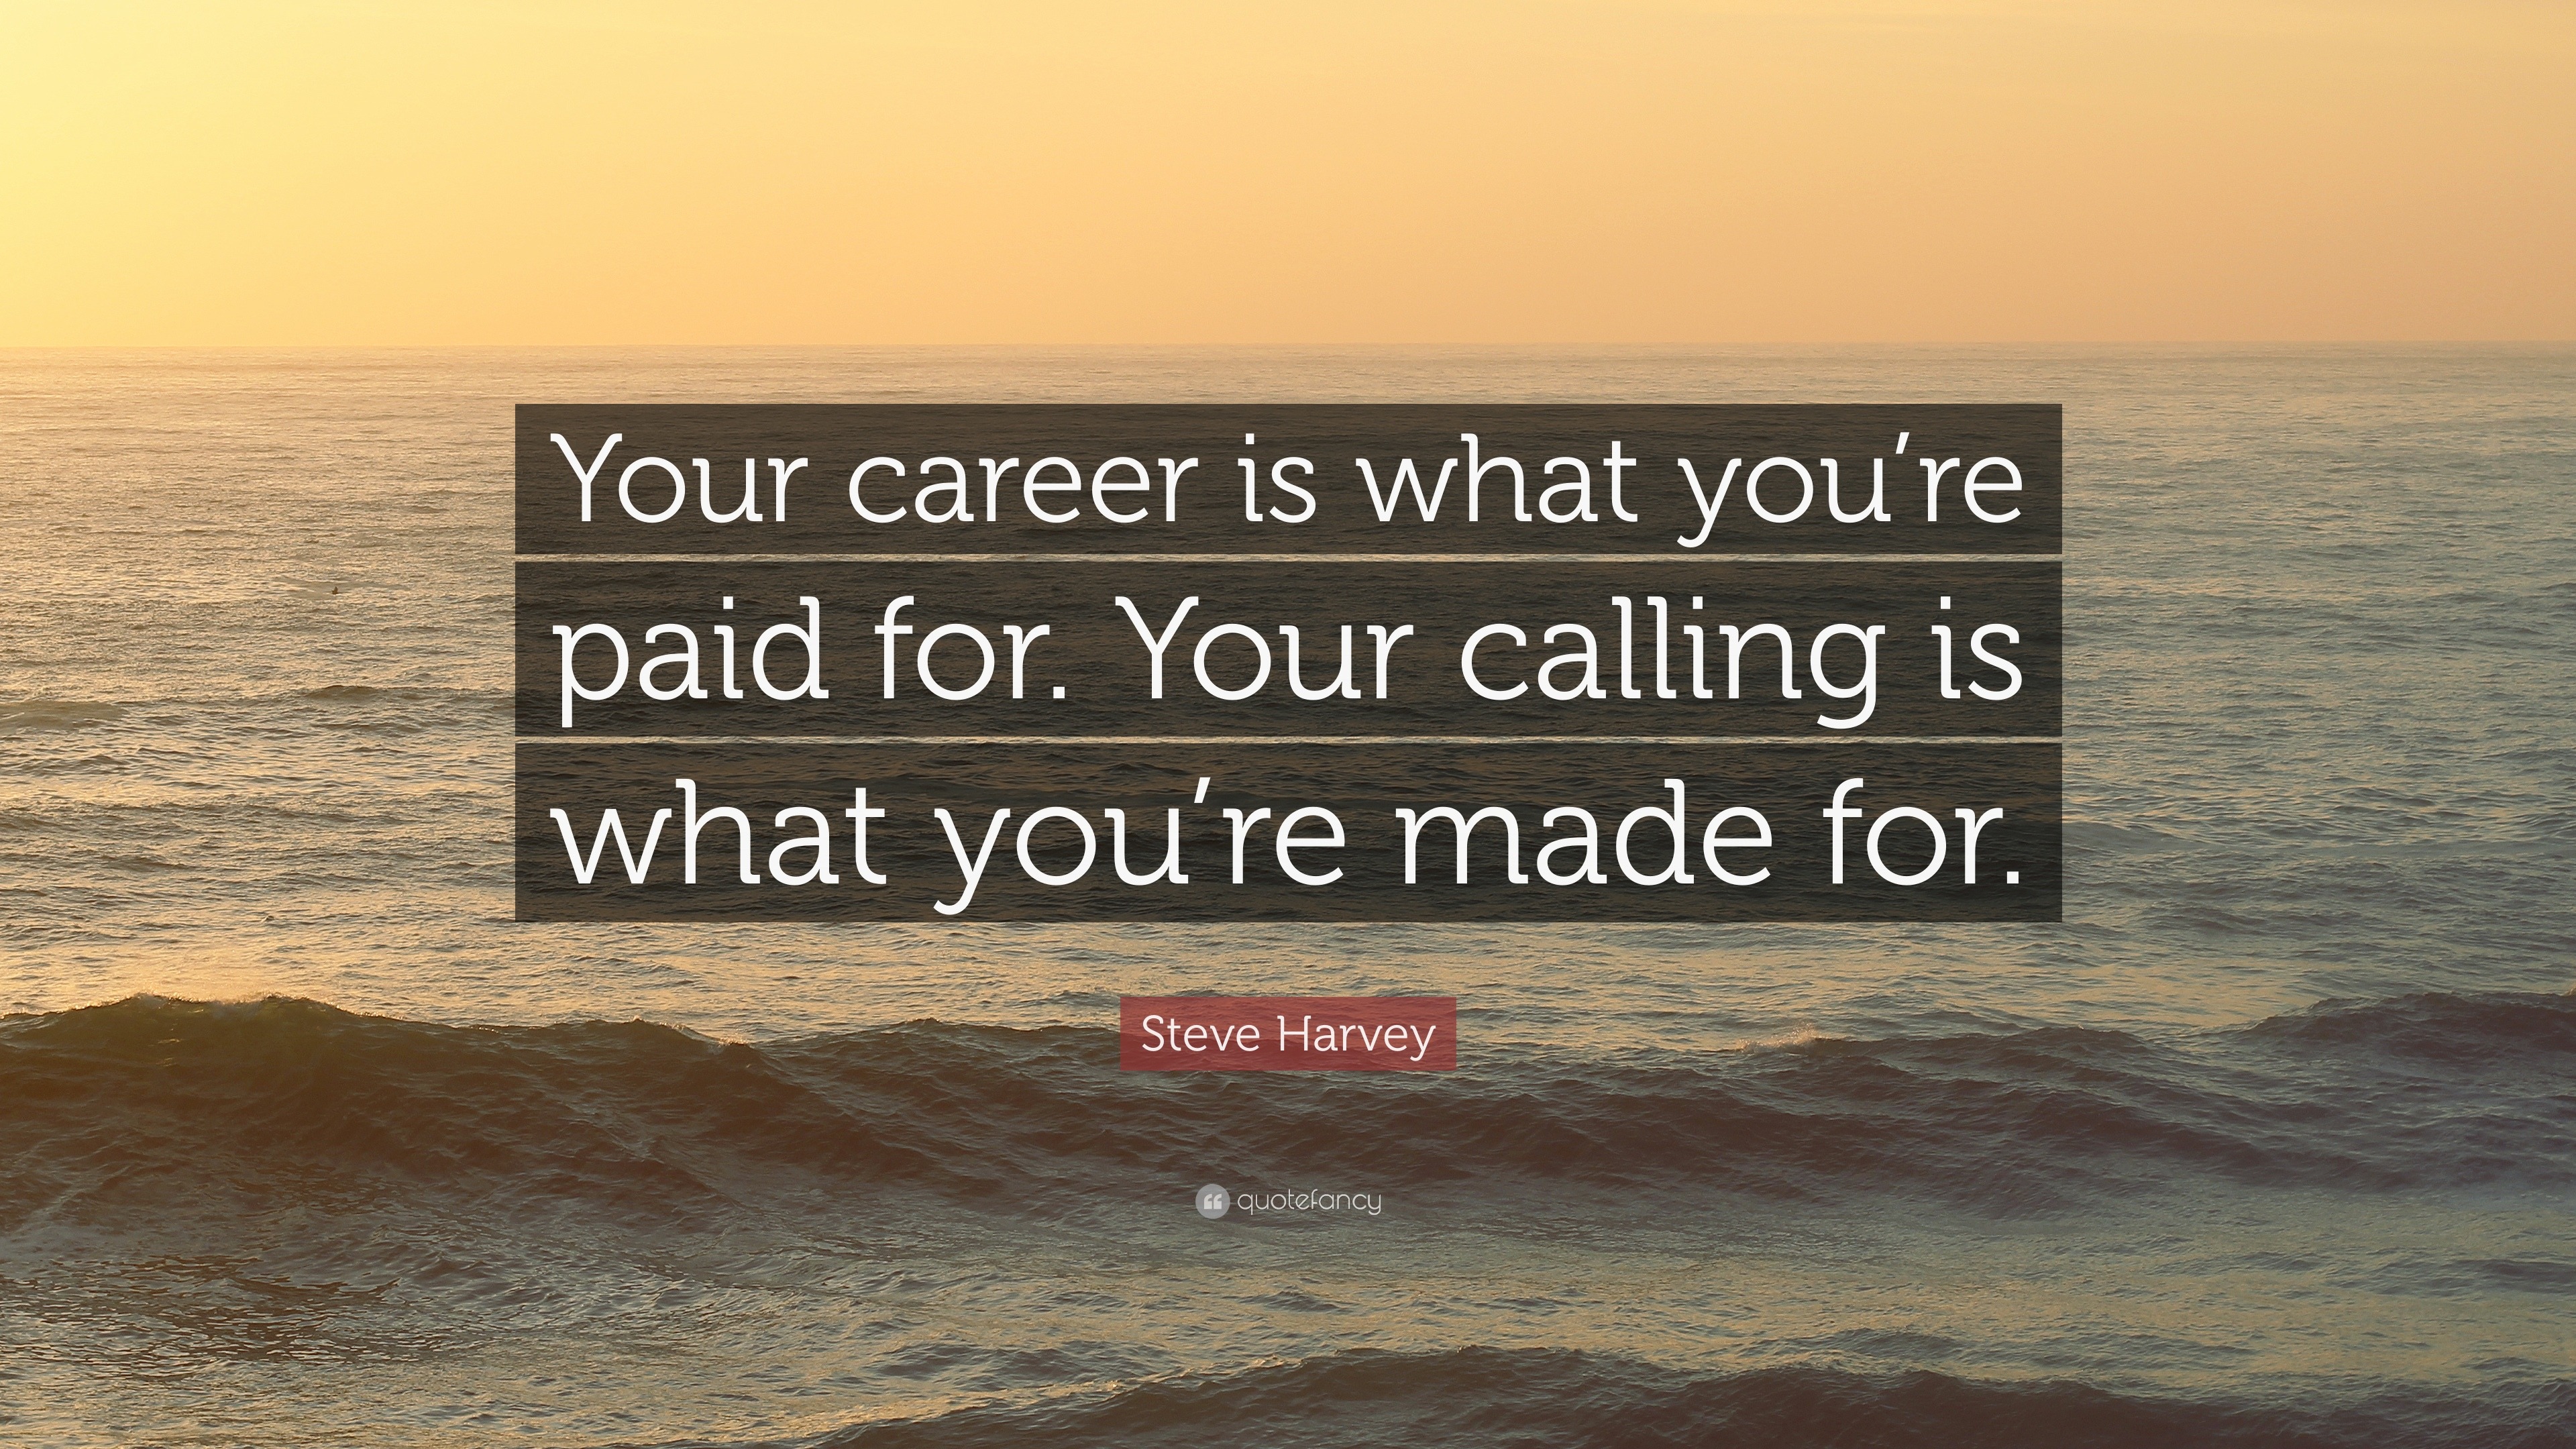 Steve Harvey Quote: “Your career is what you’re paid for. Your calling